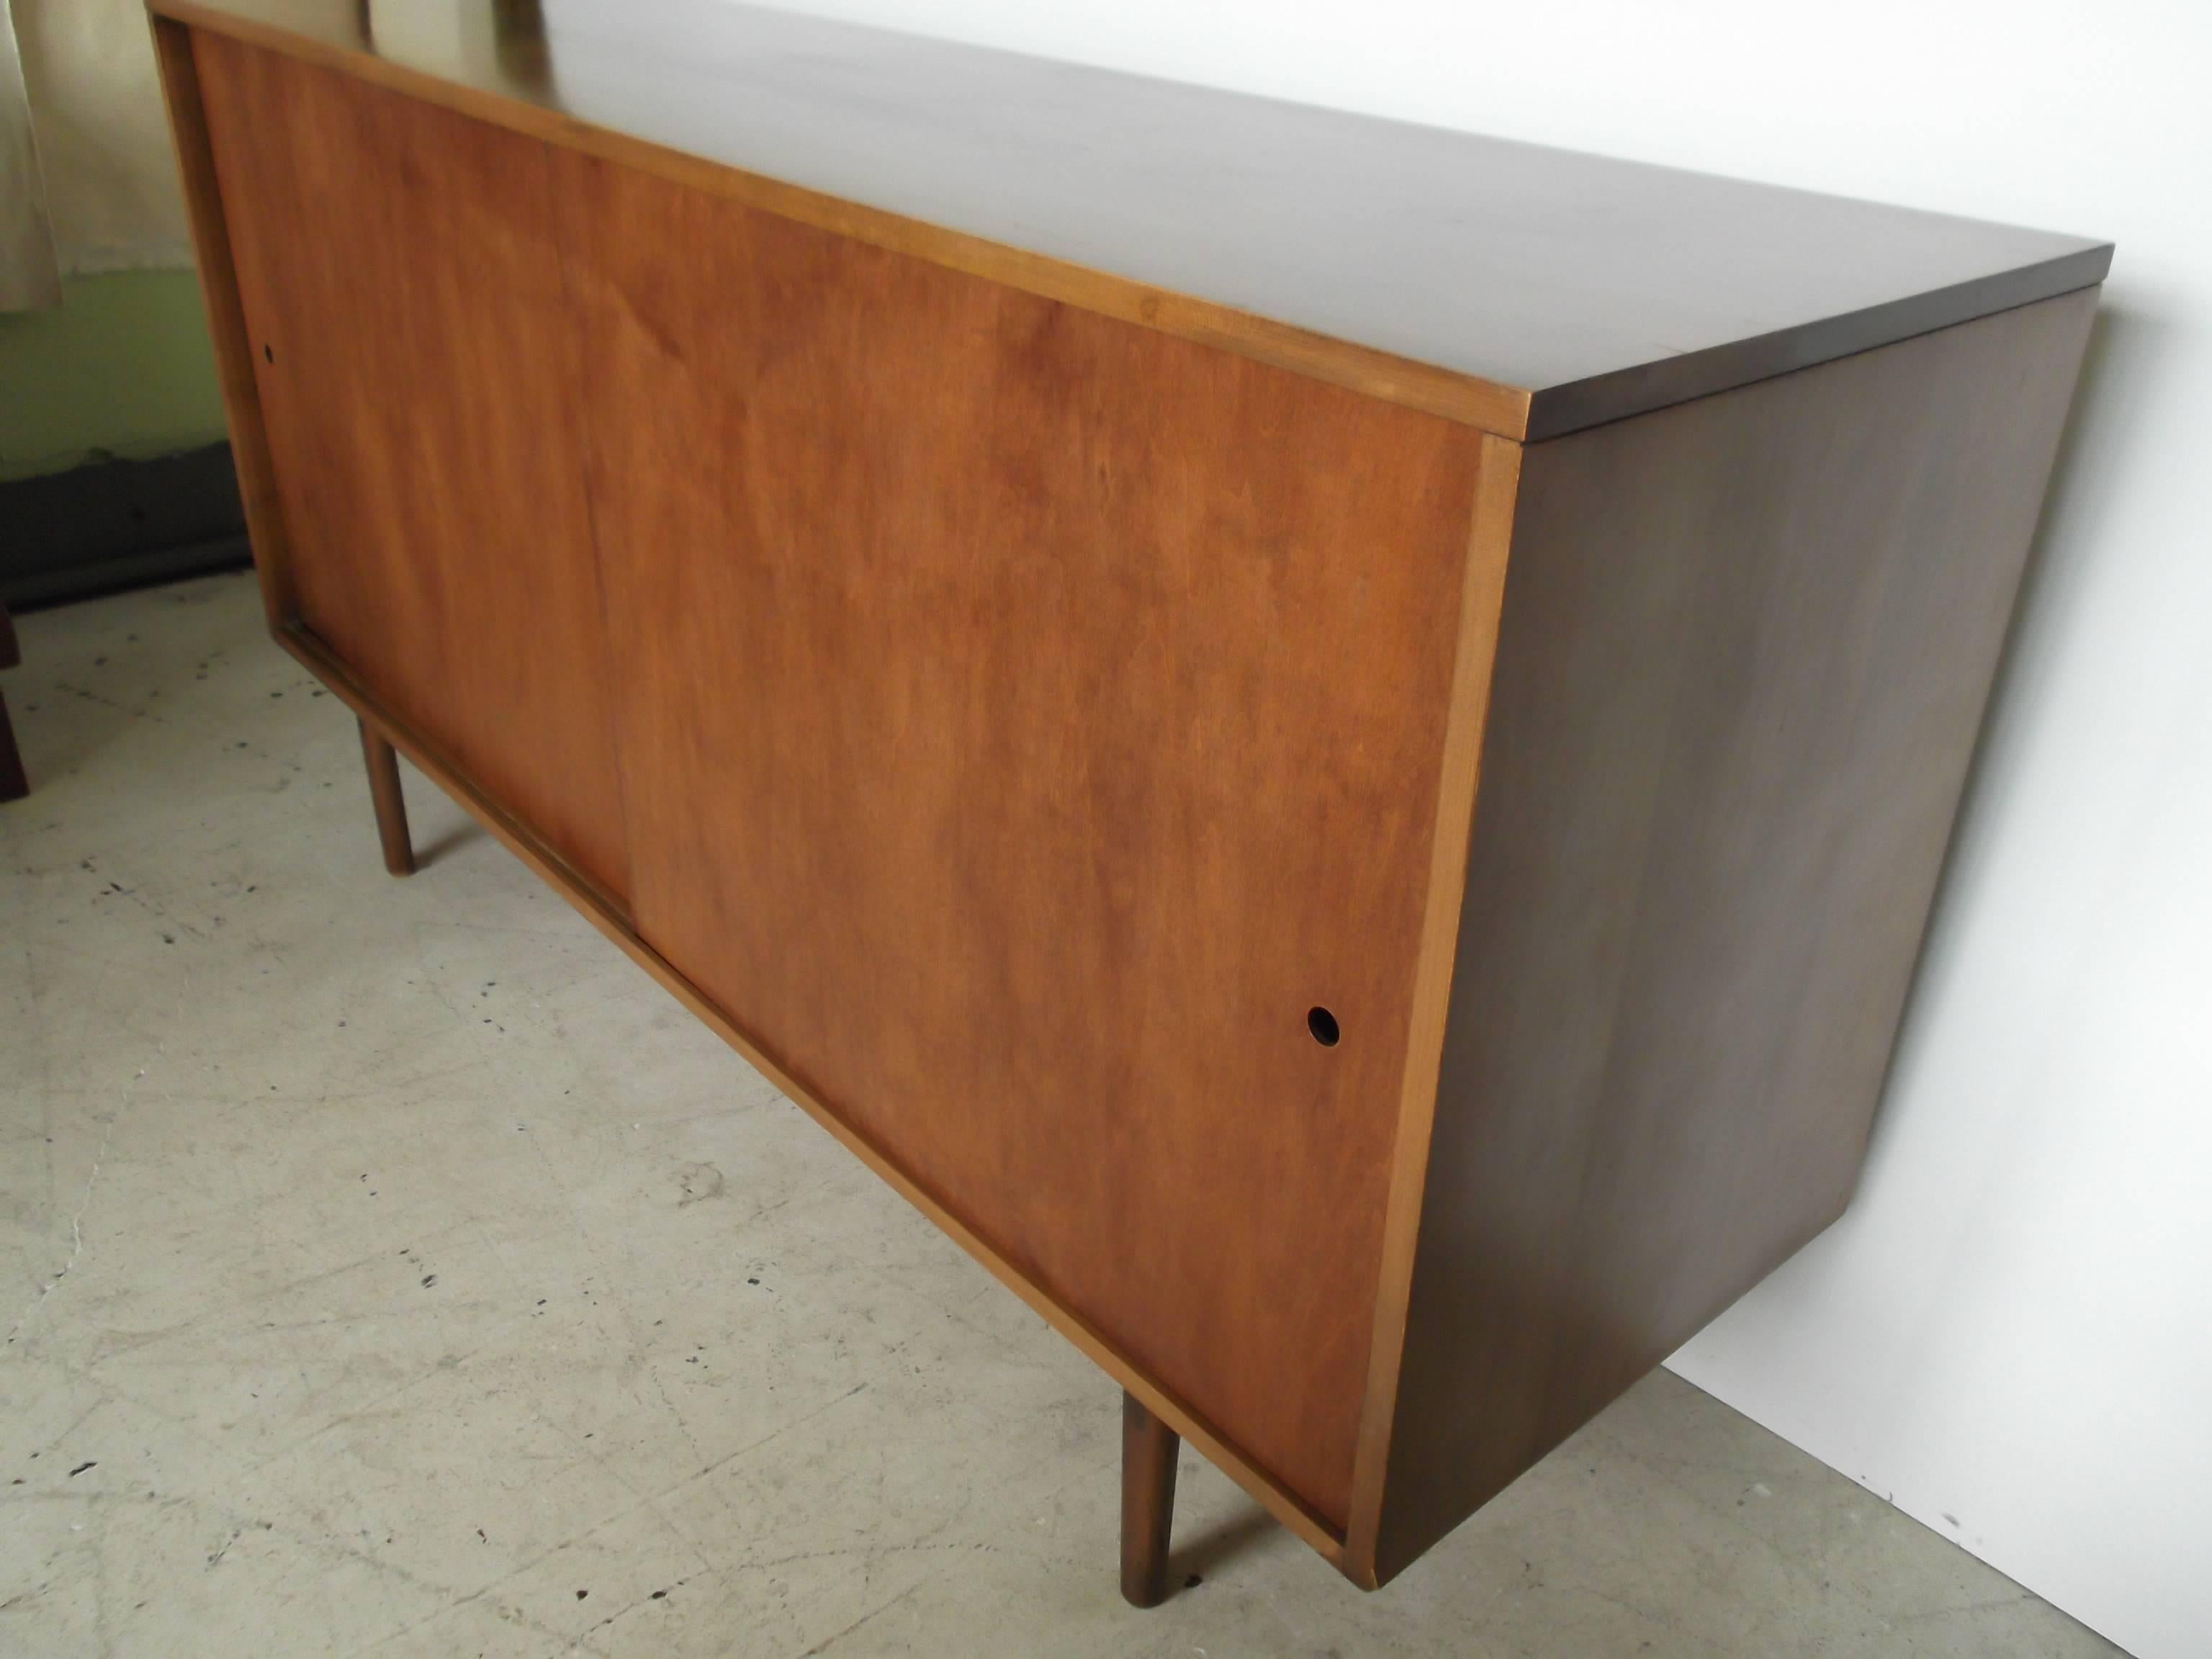 20th Century Paul McCobb Planner Group Credenza Sideboard with Walnut Finish